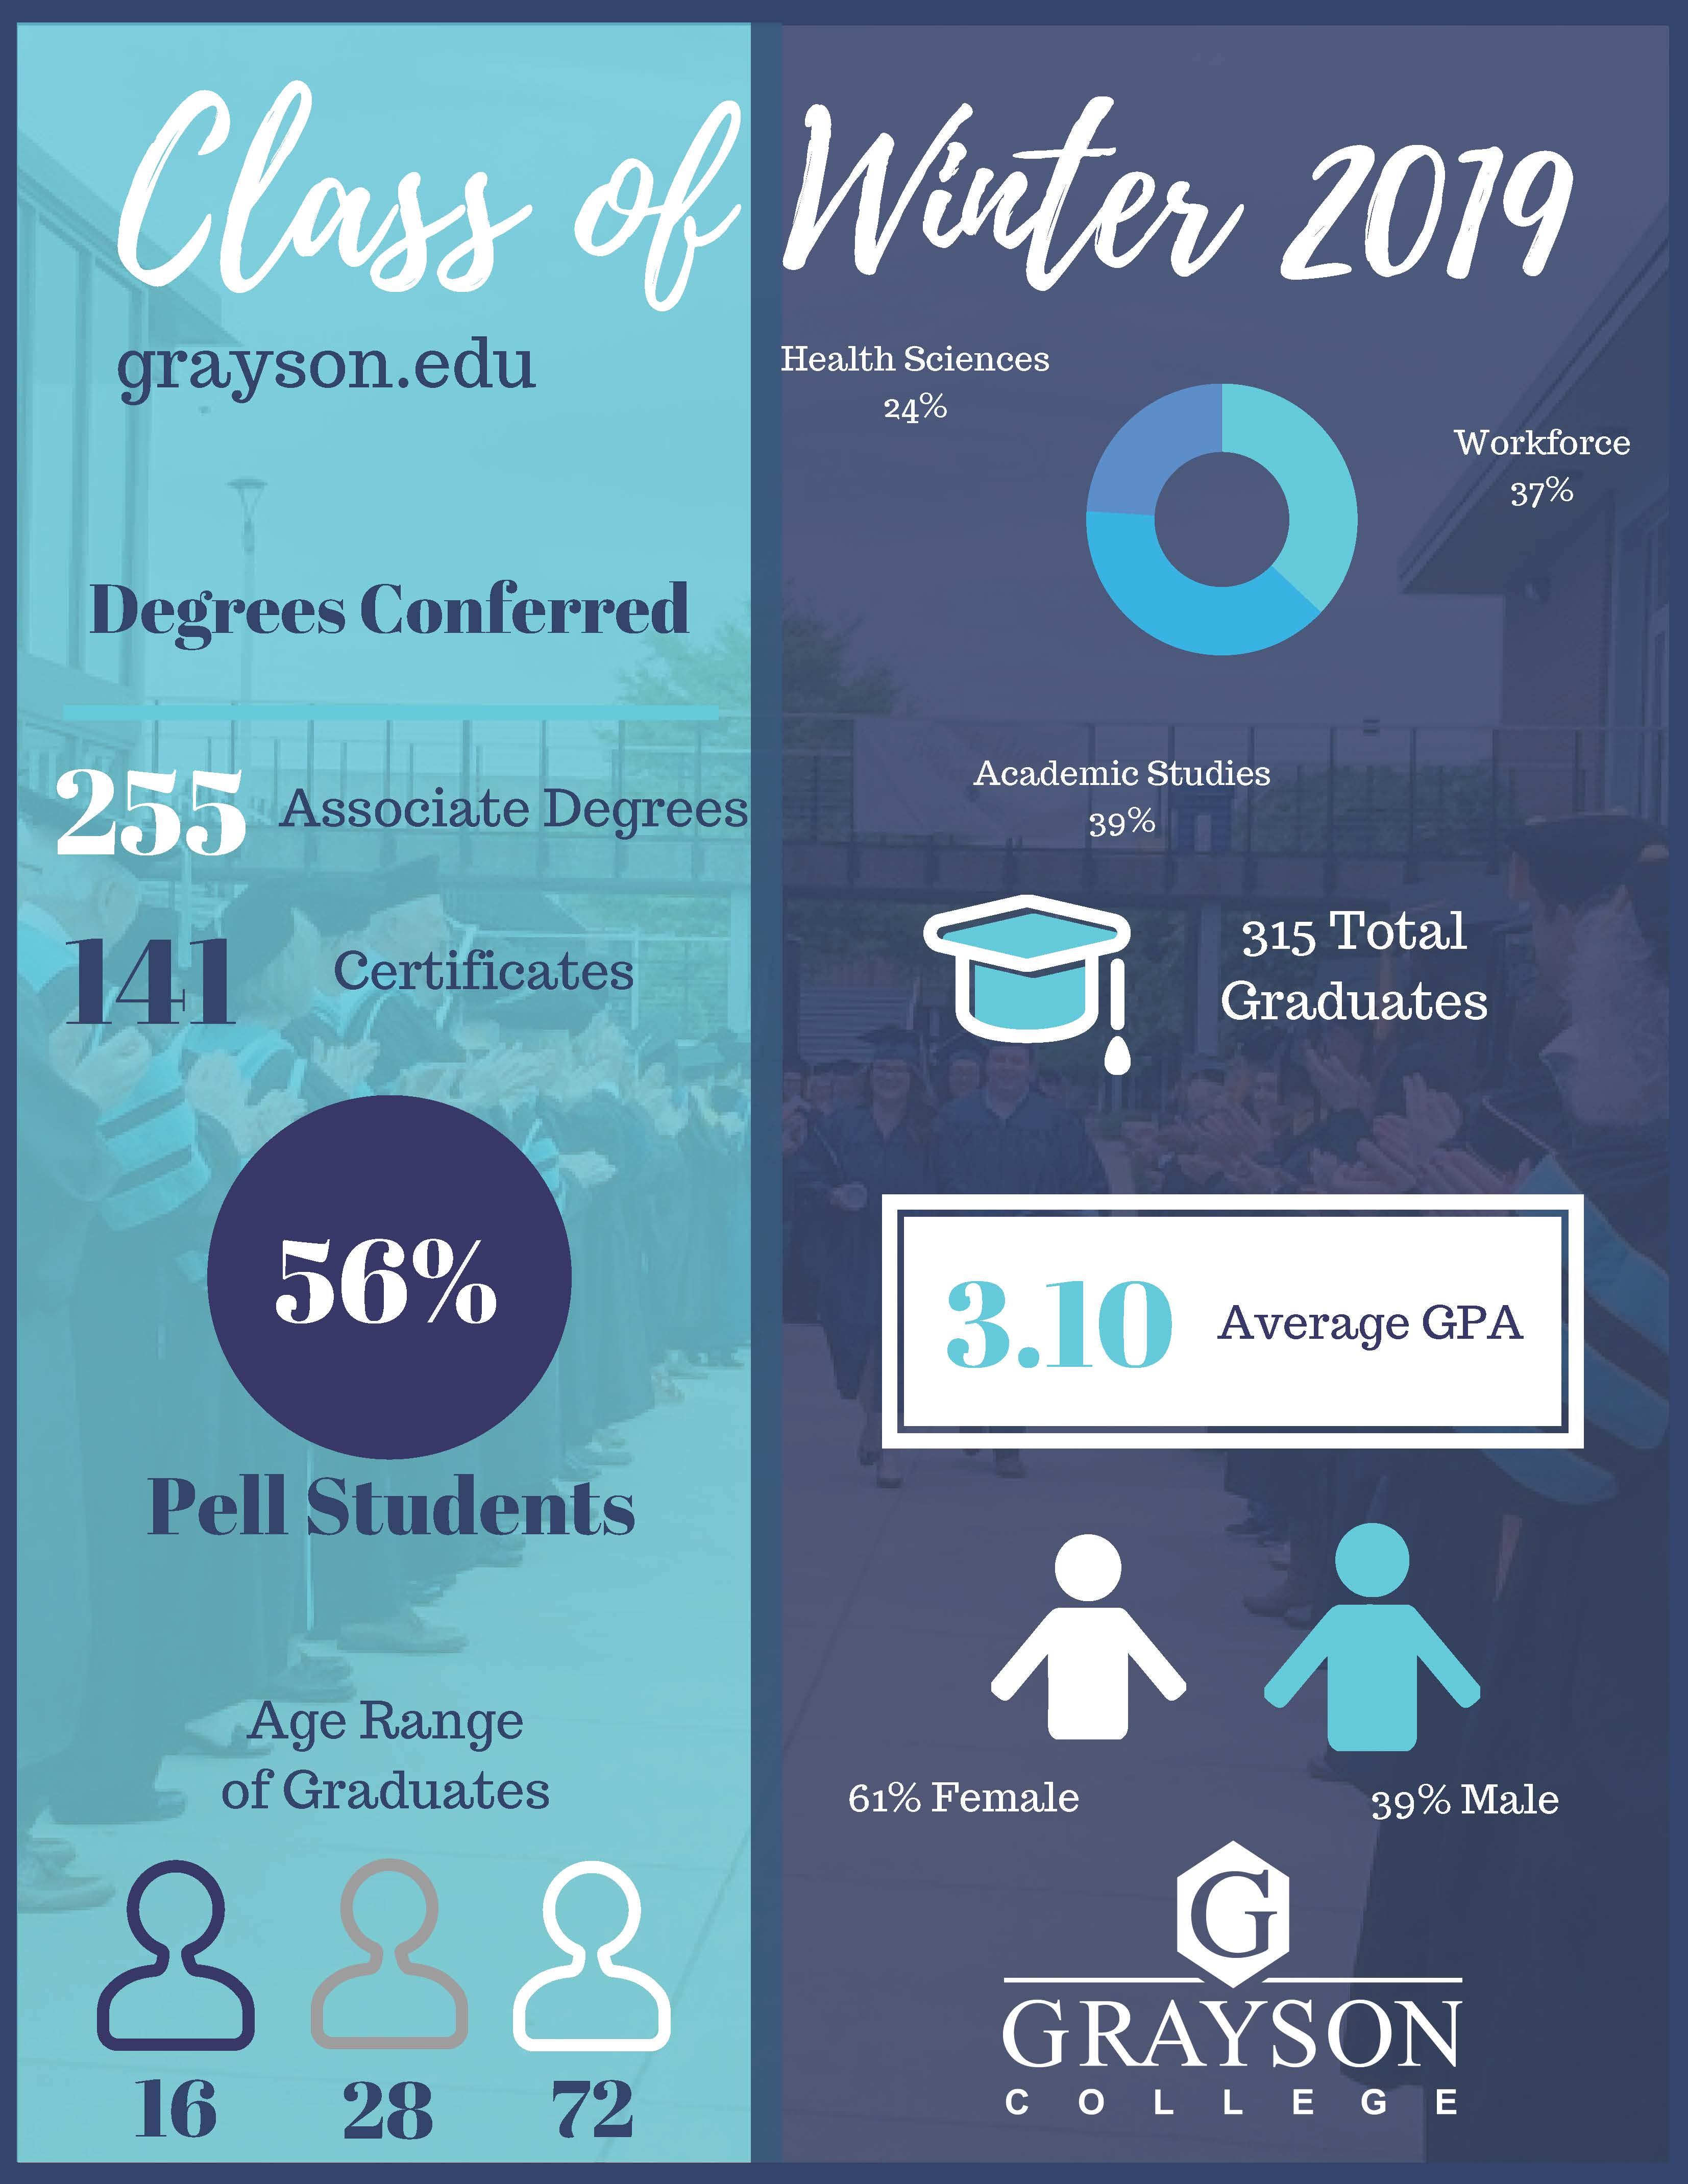 Class of Winter 2019: 255 Associate Degrees and 141 Certificates awarded. 56% of Graduates recieved Pell Grants. Age ranged from 16-72. 24% Health Science, 37% workforce, 39% academic studies. 315 total graduates. 3.10 average GPA. 61% Female 39% Male